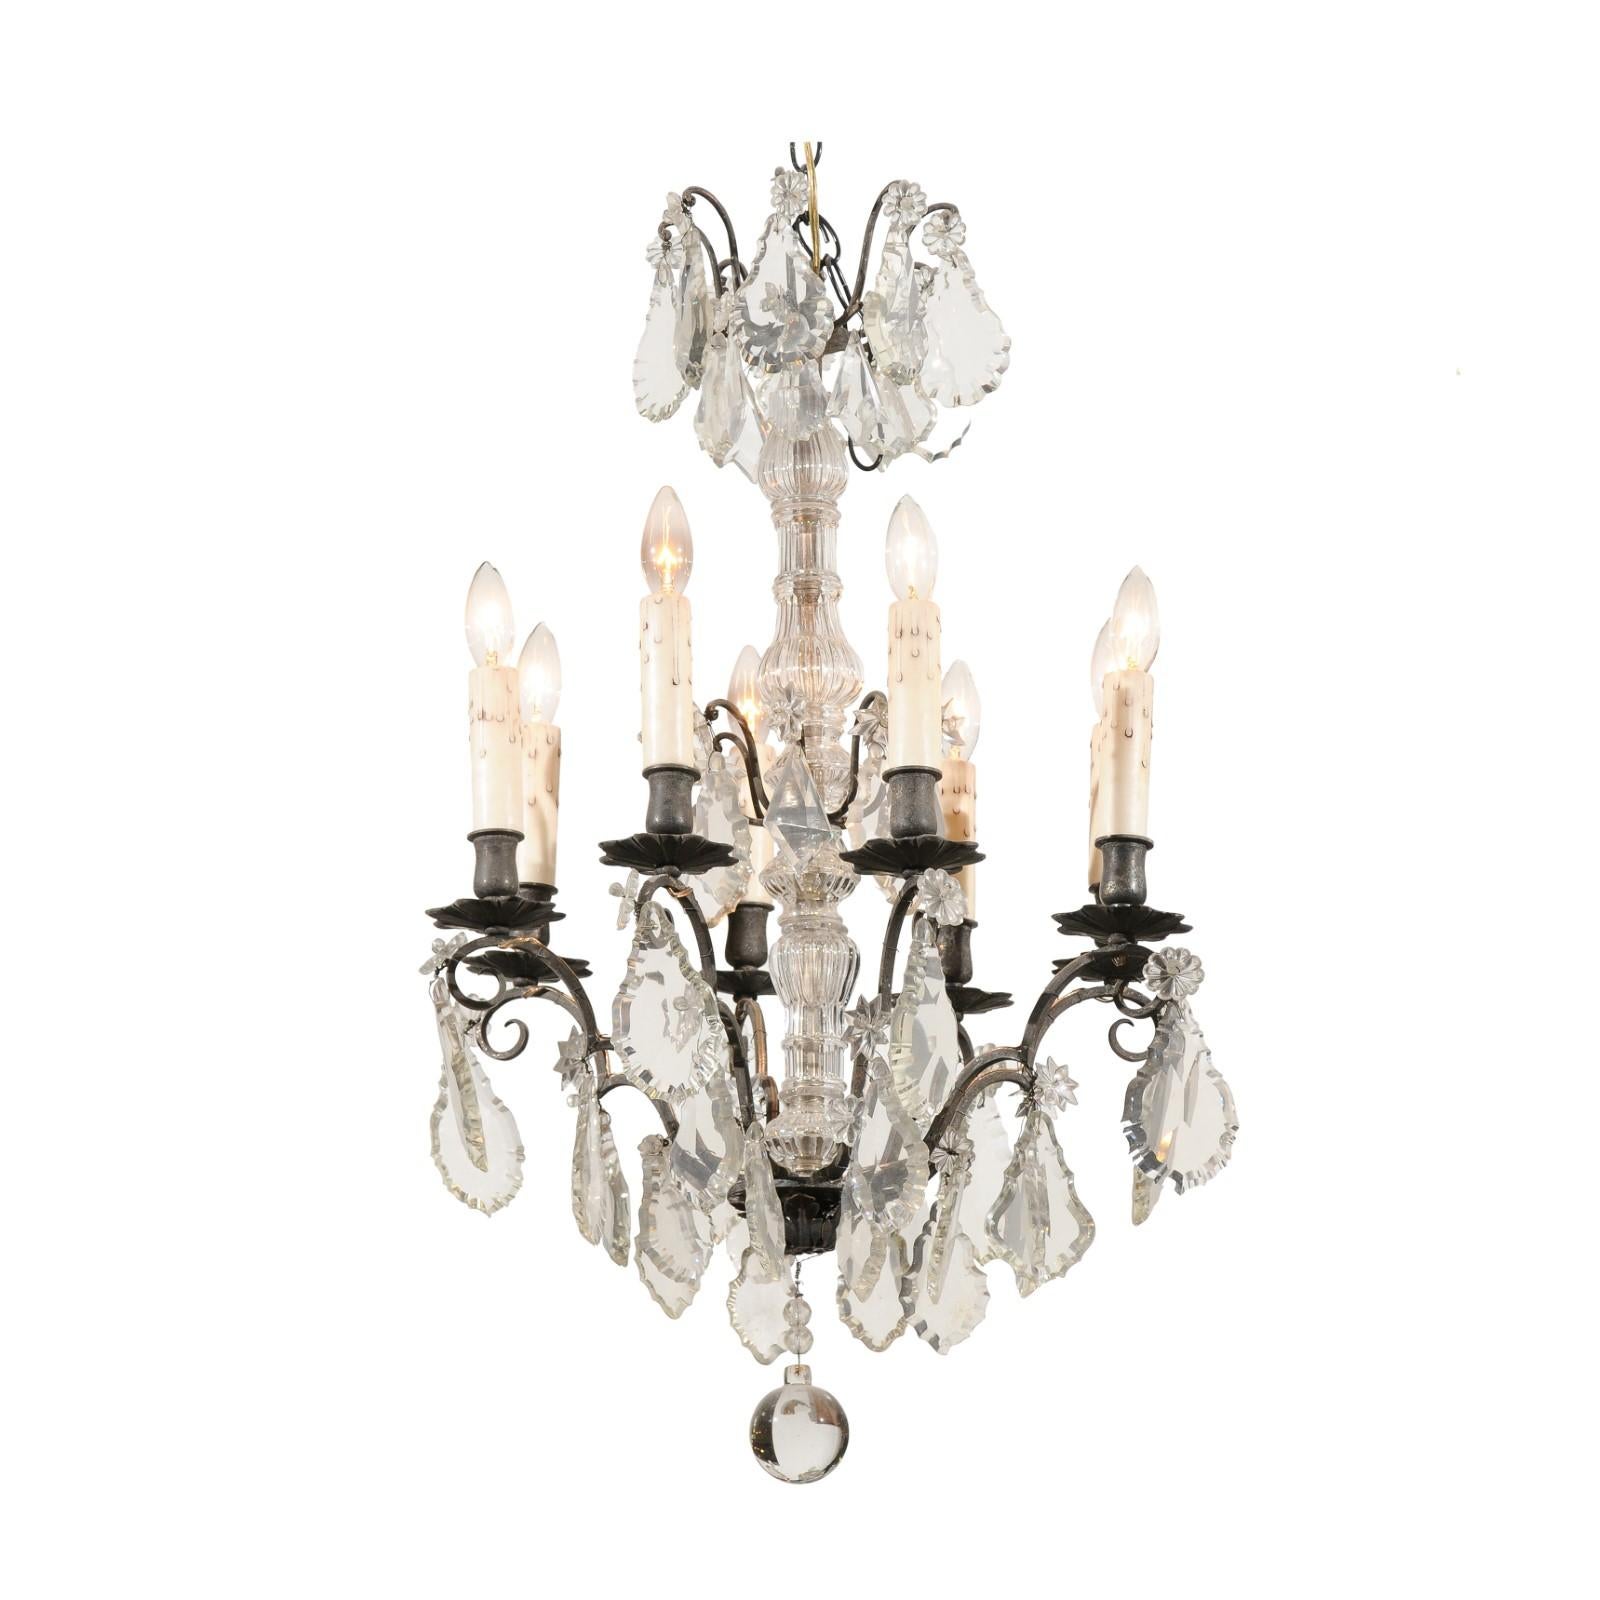 A French eight arms crystal chandelier from the 19th century, with metal armature. Born in France during the 19th century, this exquisite crystal chandelier features a central column topped with delicate pendeloques and rosettes. The lower section